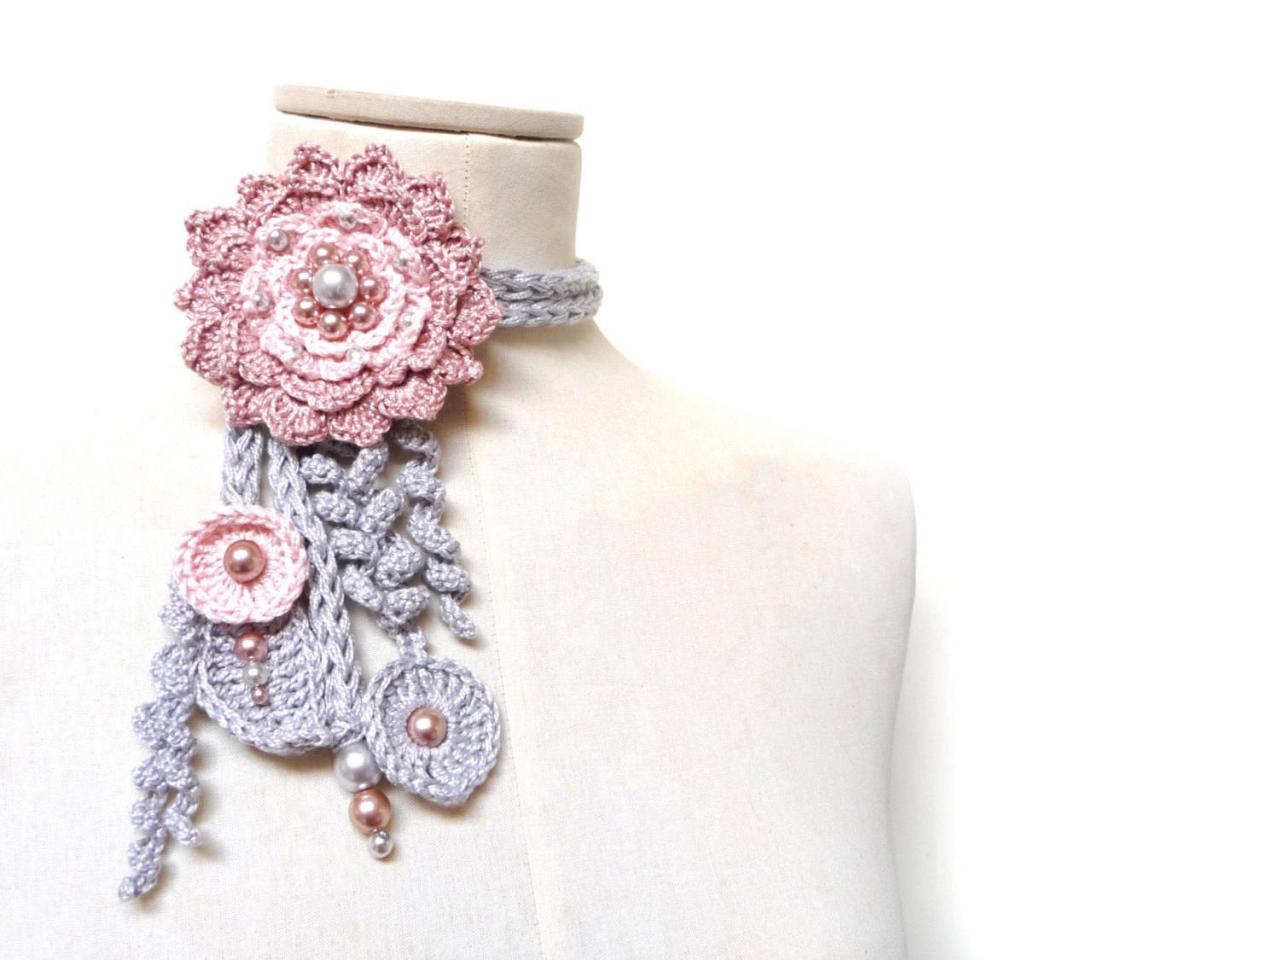 Crochet Cotton Lariat Necklaces - Light Grey Leaves And Powder Pink Flower With Glass Pearls - Little Peony